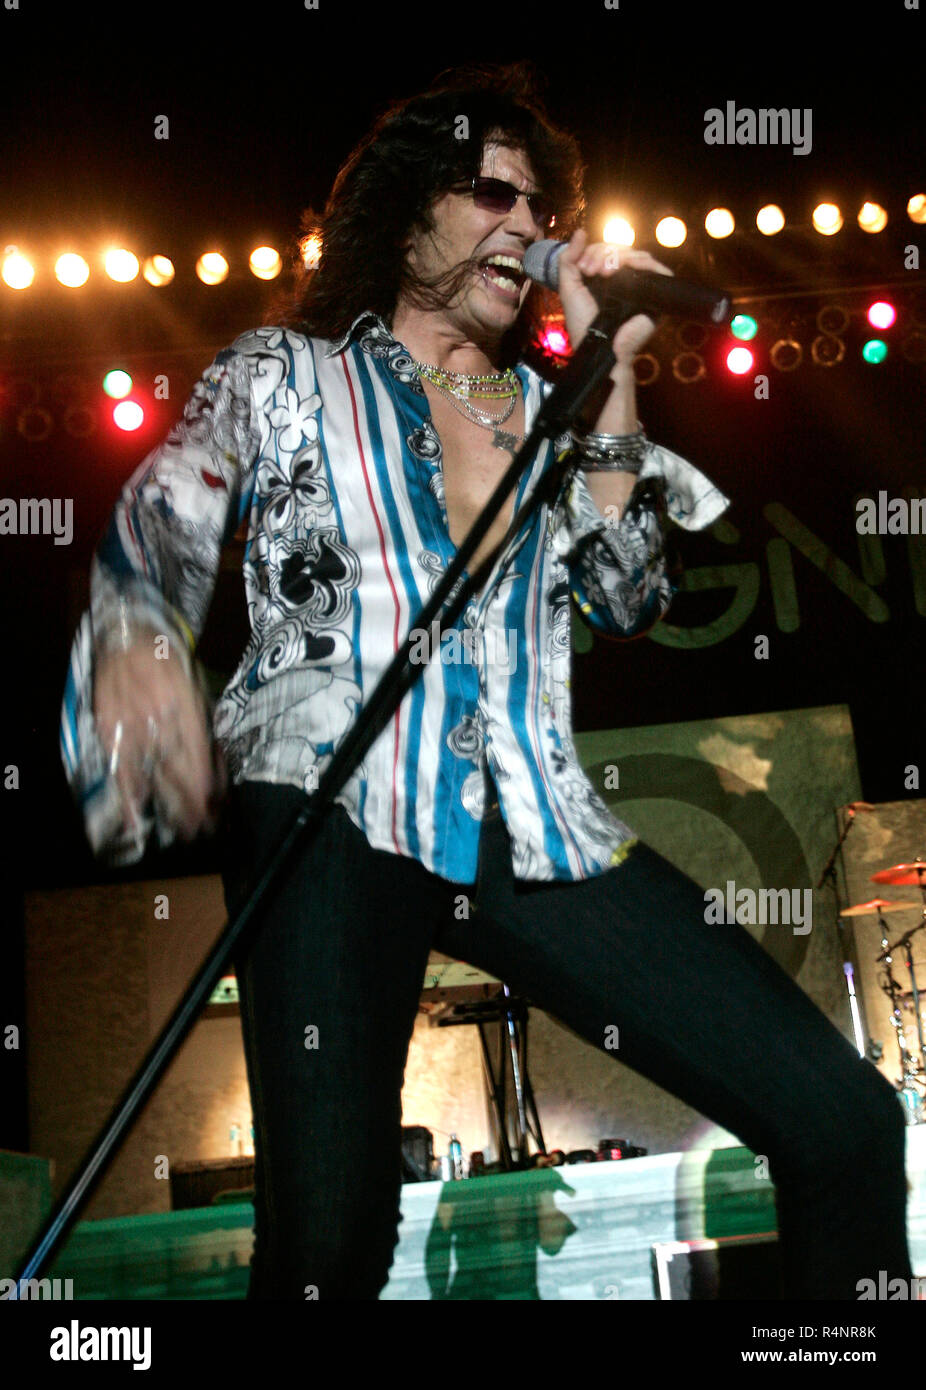 Kelly Hansen with Foreigner performs in concert at the Mizner Park Amphitheatre in Boca Raton, Florida on December 29, 2007. Stock Photo